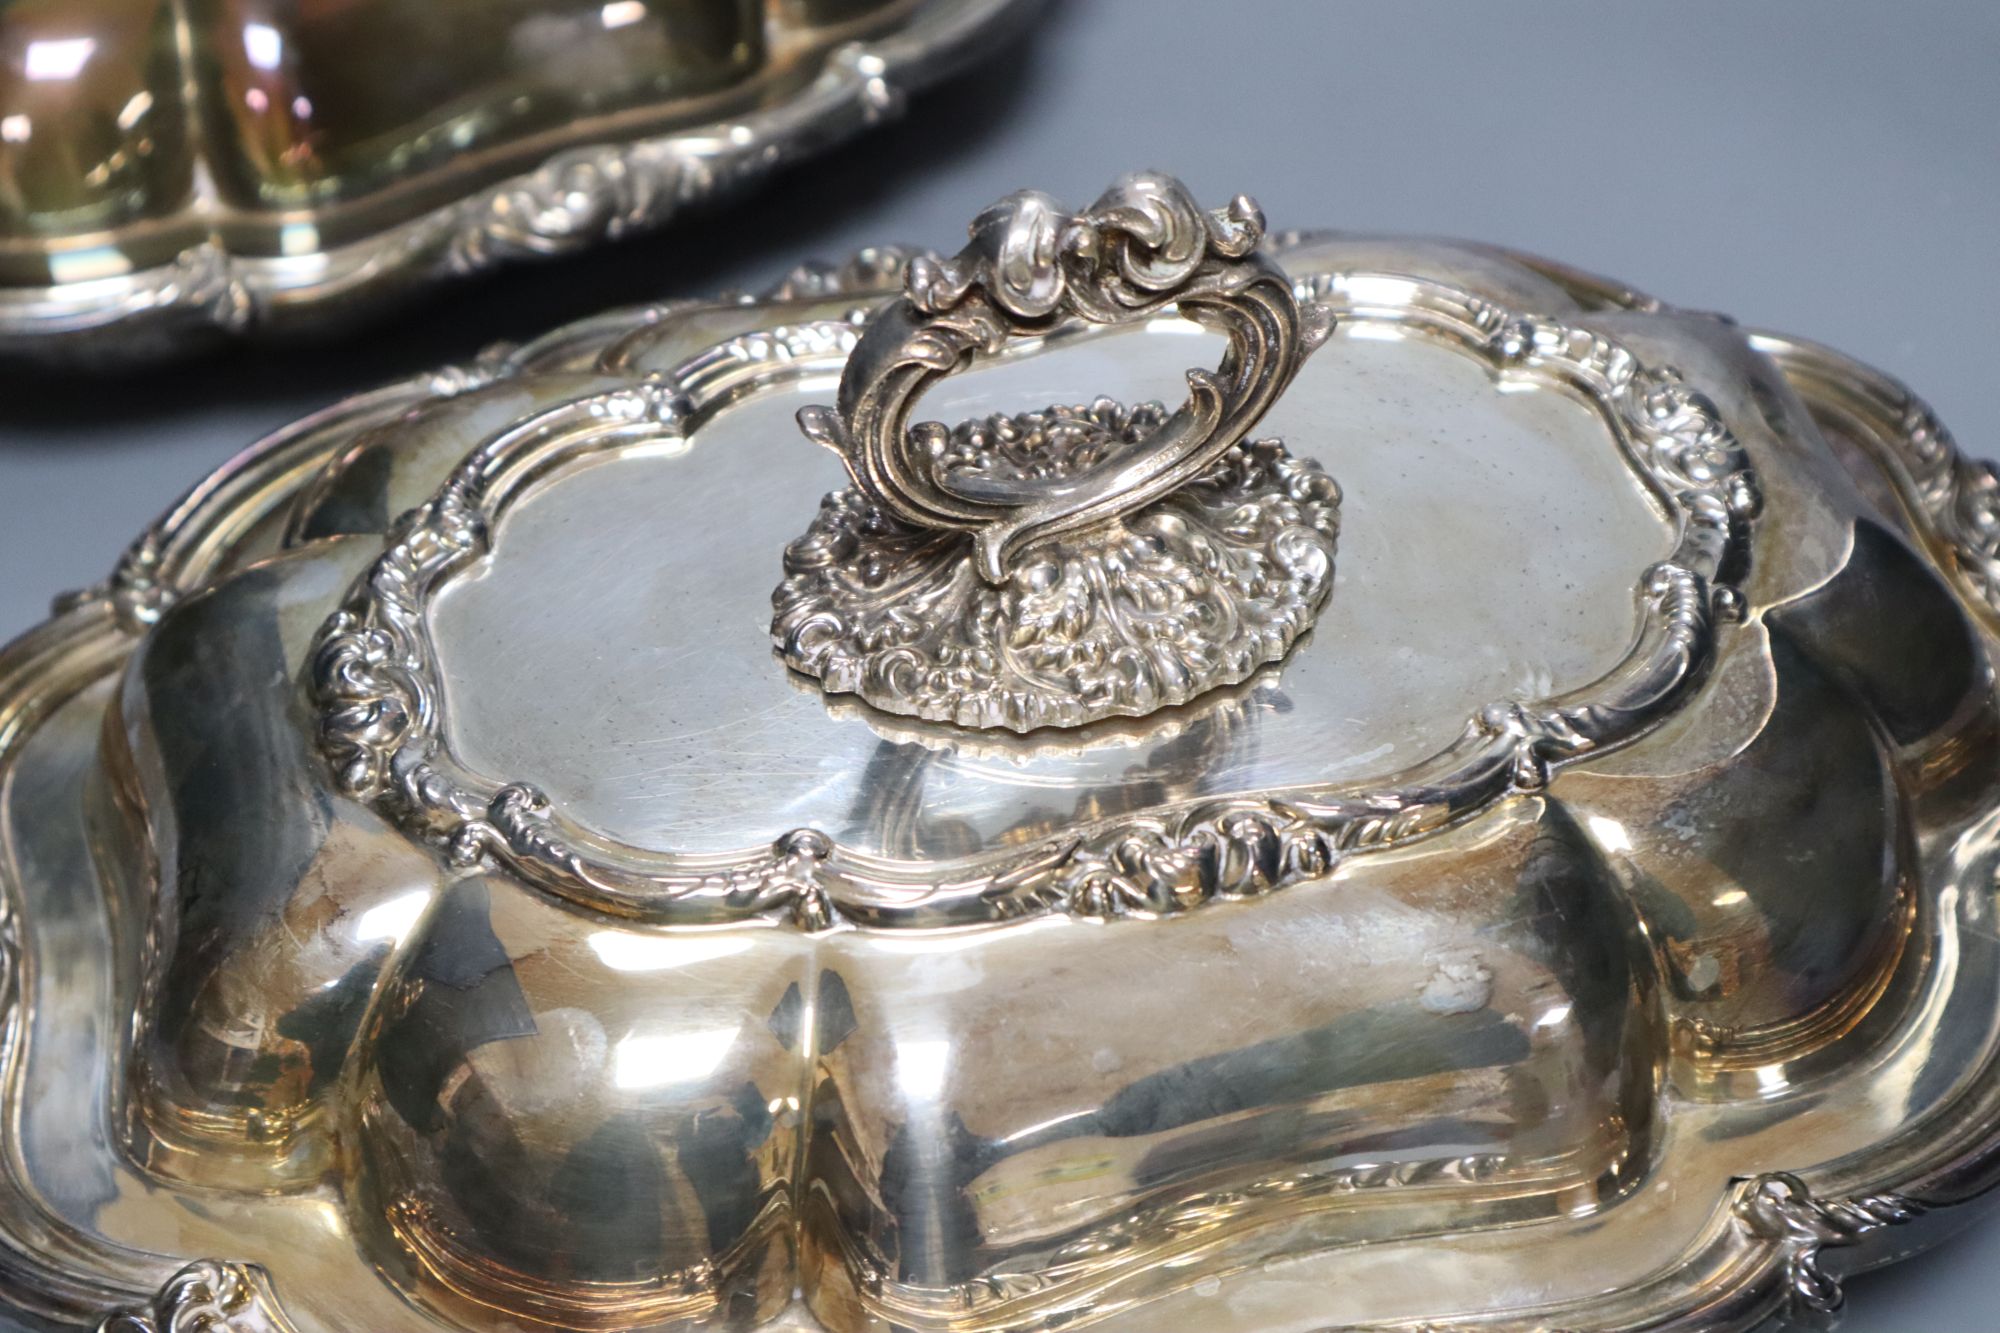 A pair of Victorian plated tureens and a plater sugar sifter